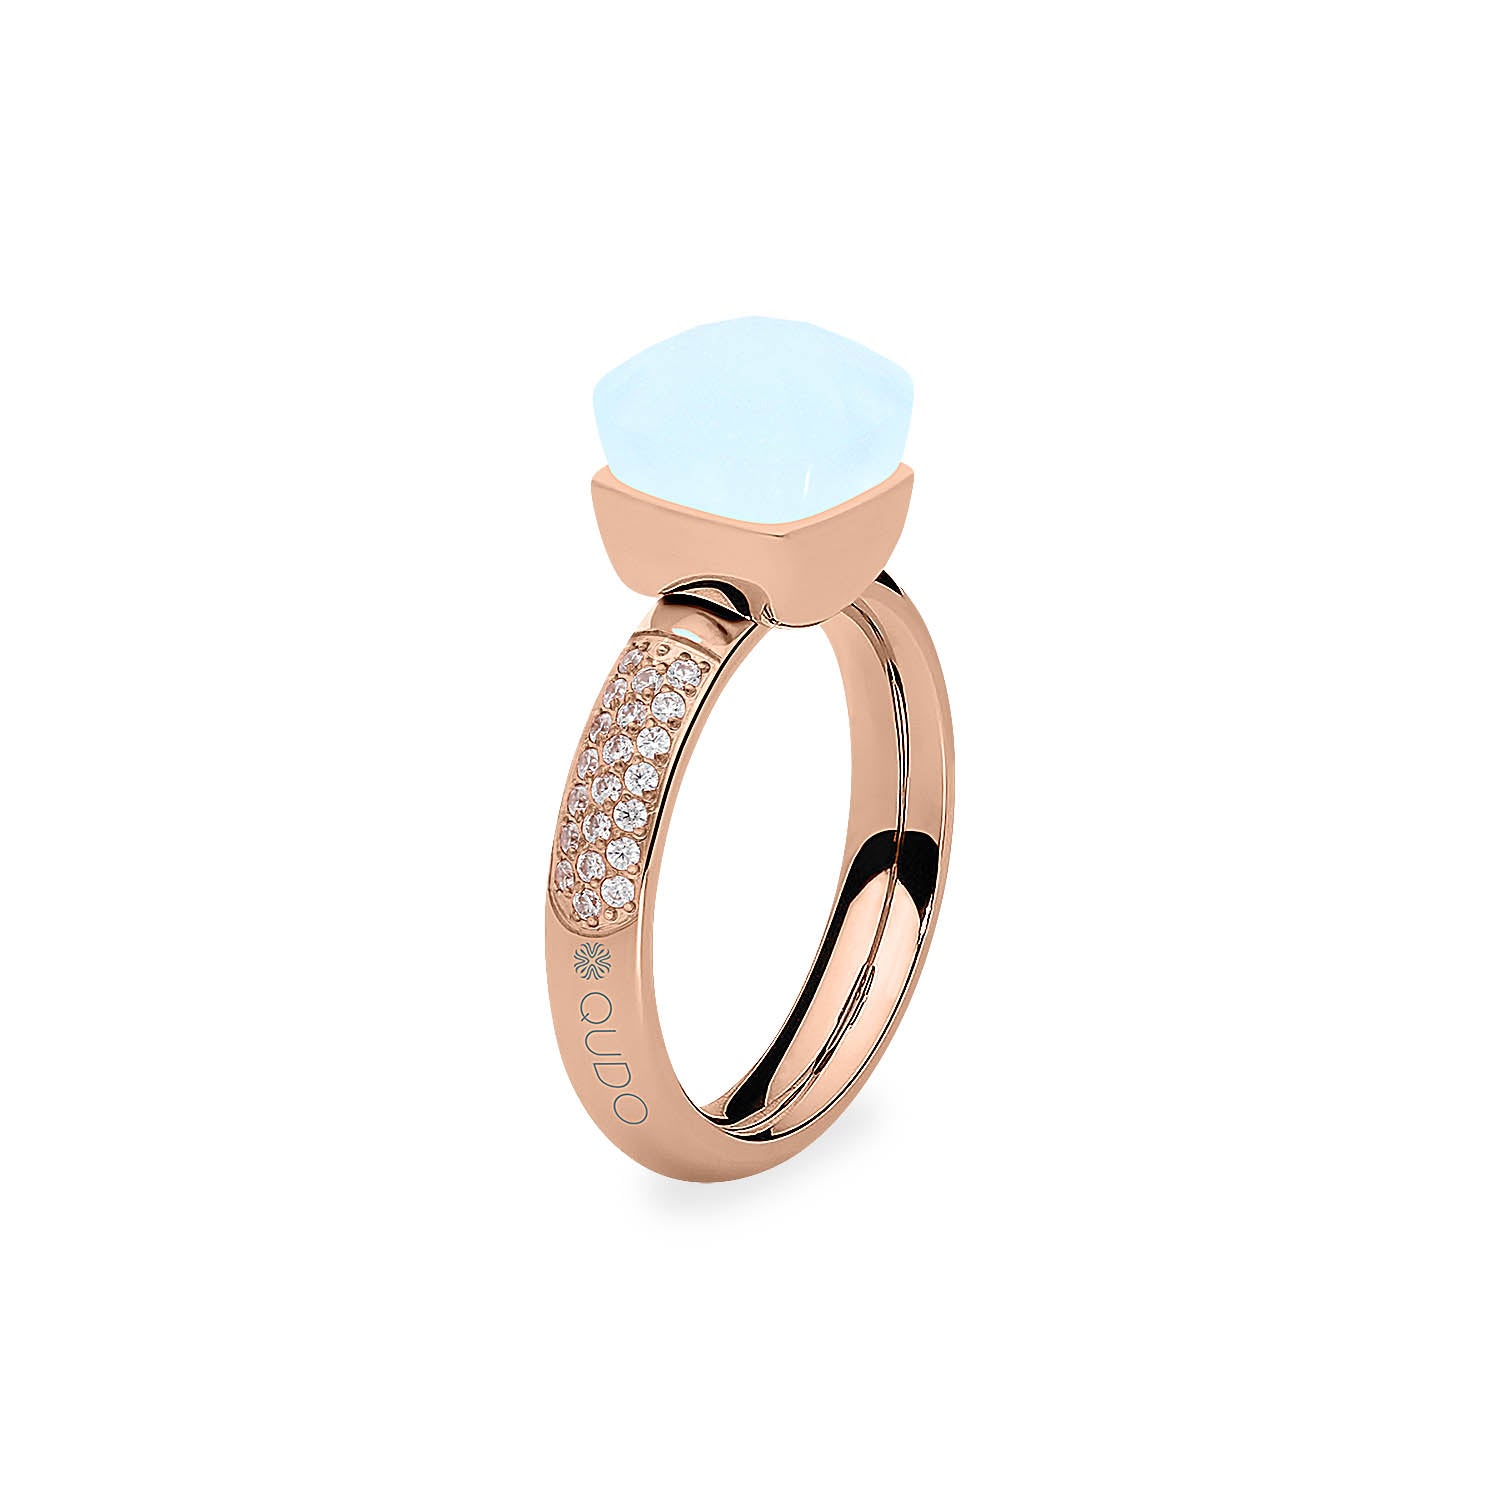 Firenze Deluxe Ring - Shades of Blue - Roségold